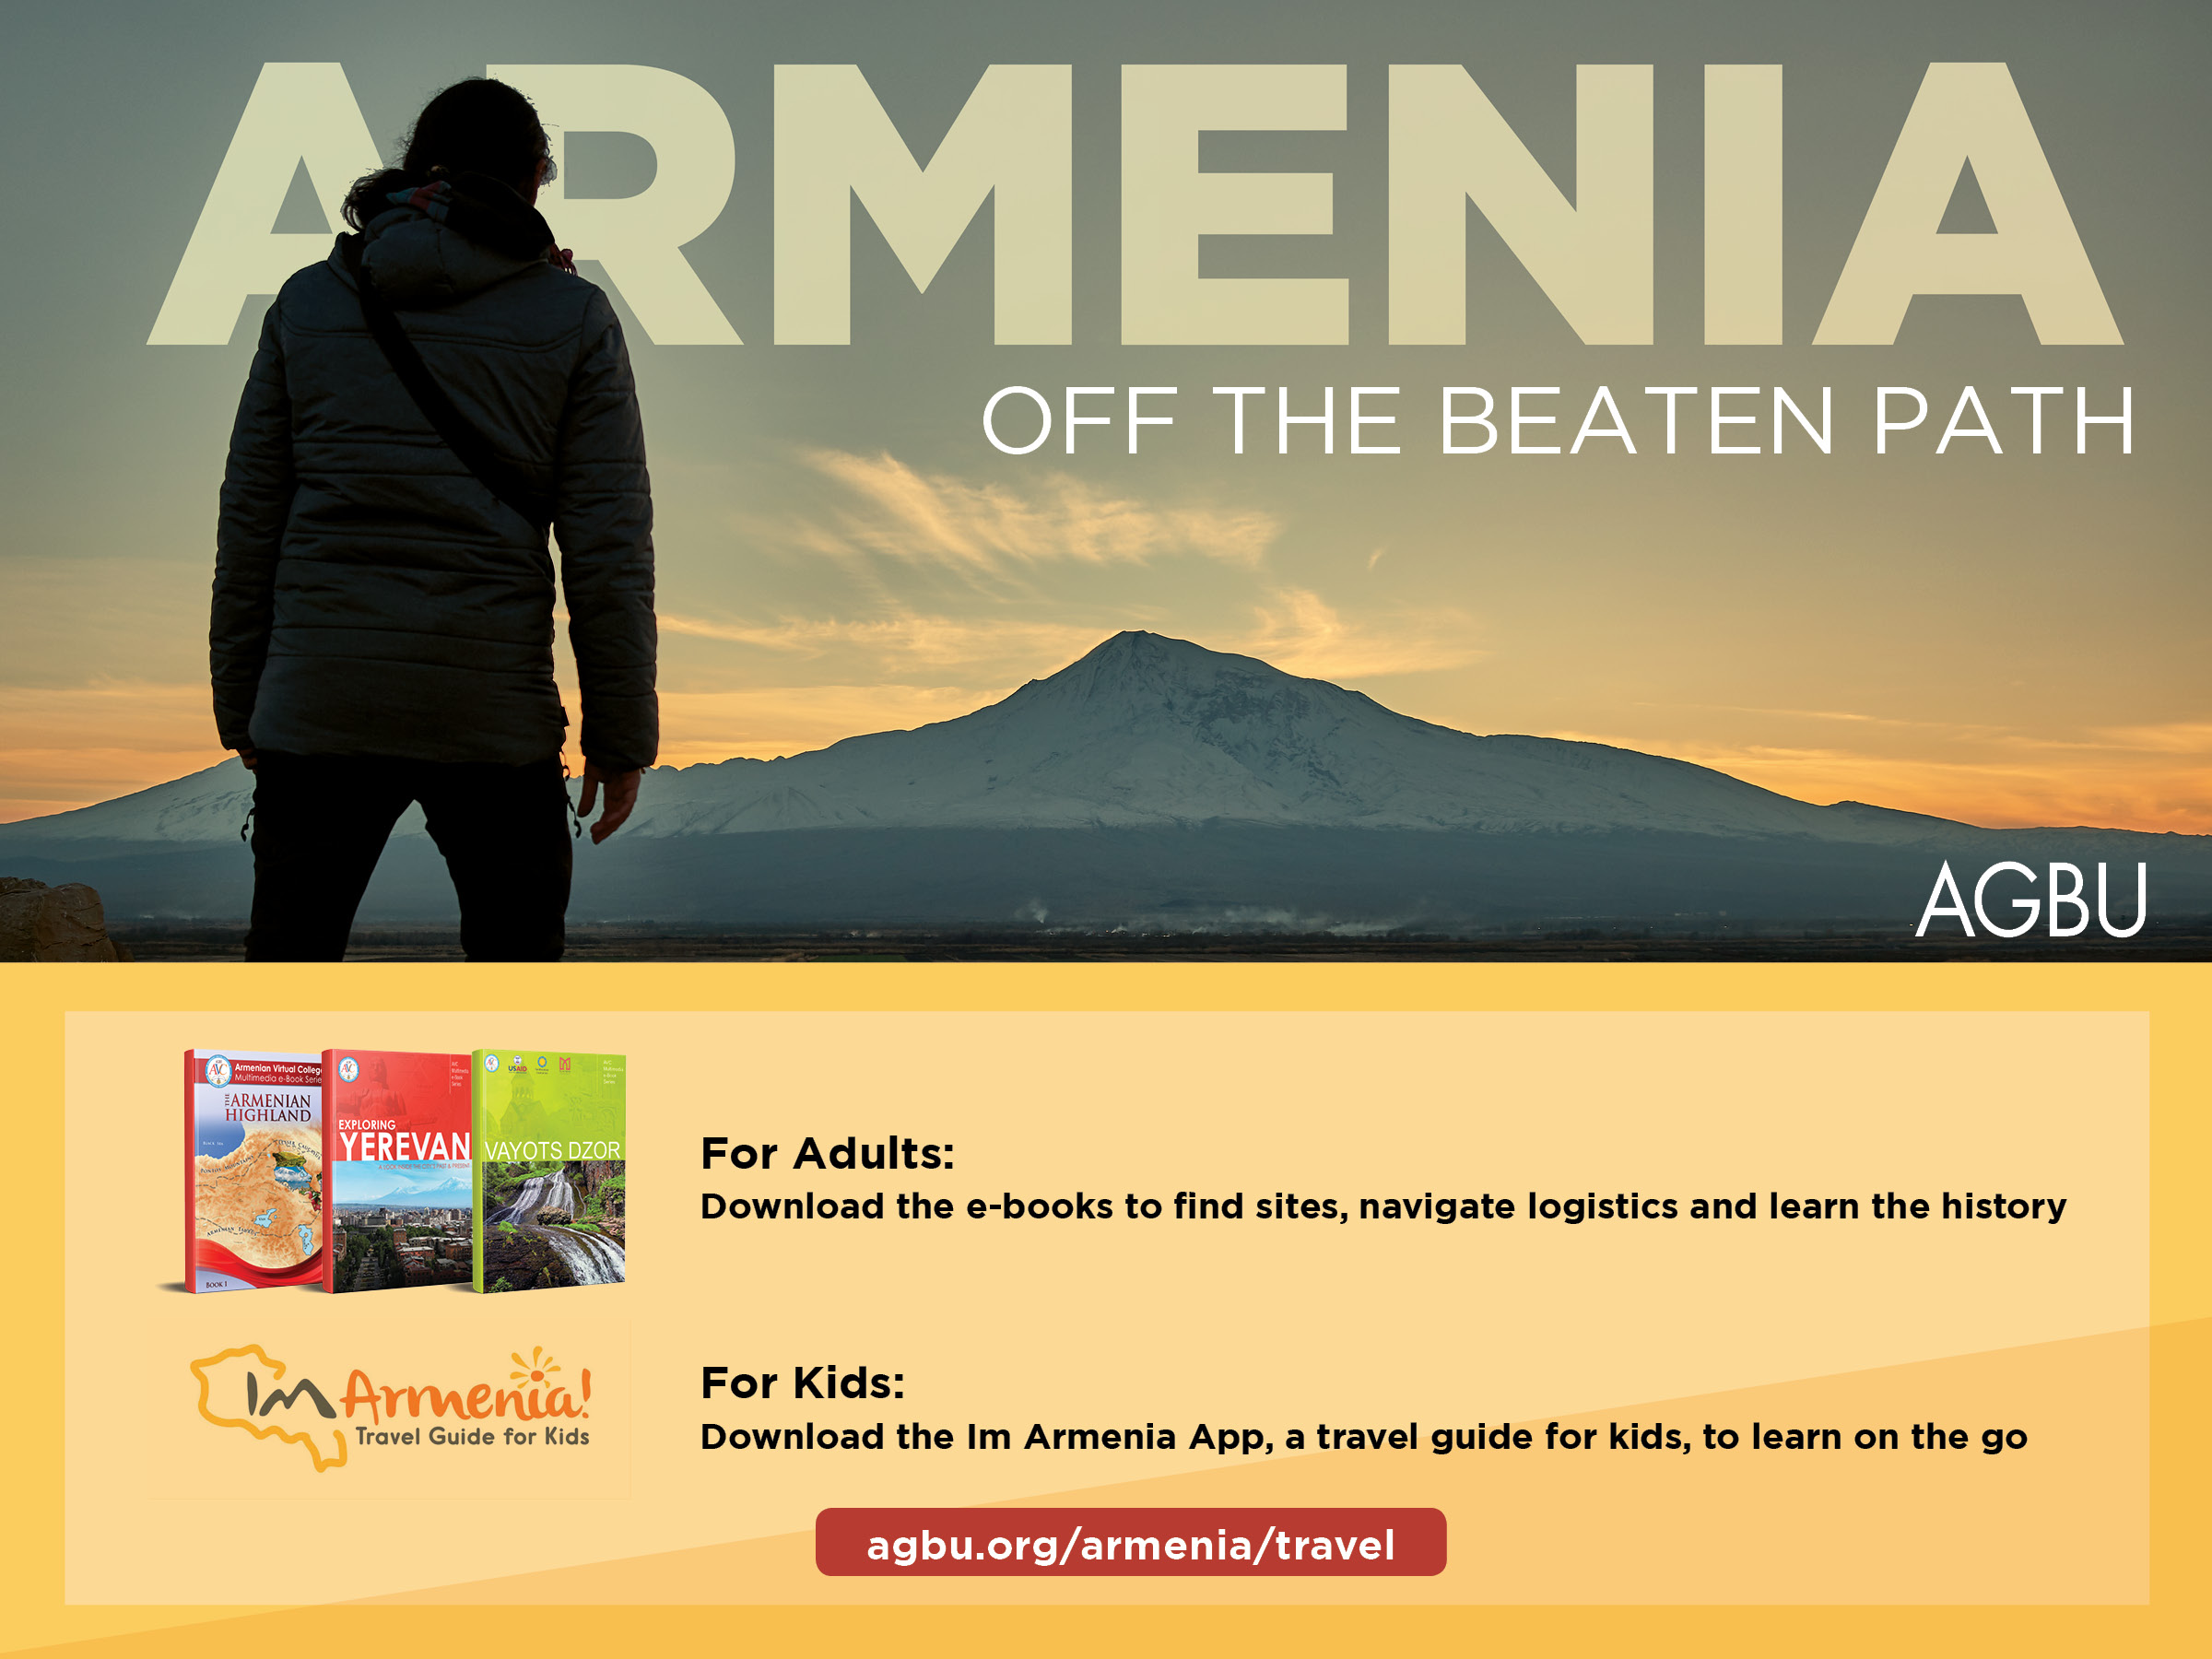 AGBU offers must-have e-books, apps about Armenia